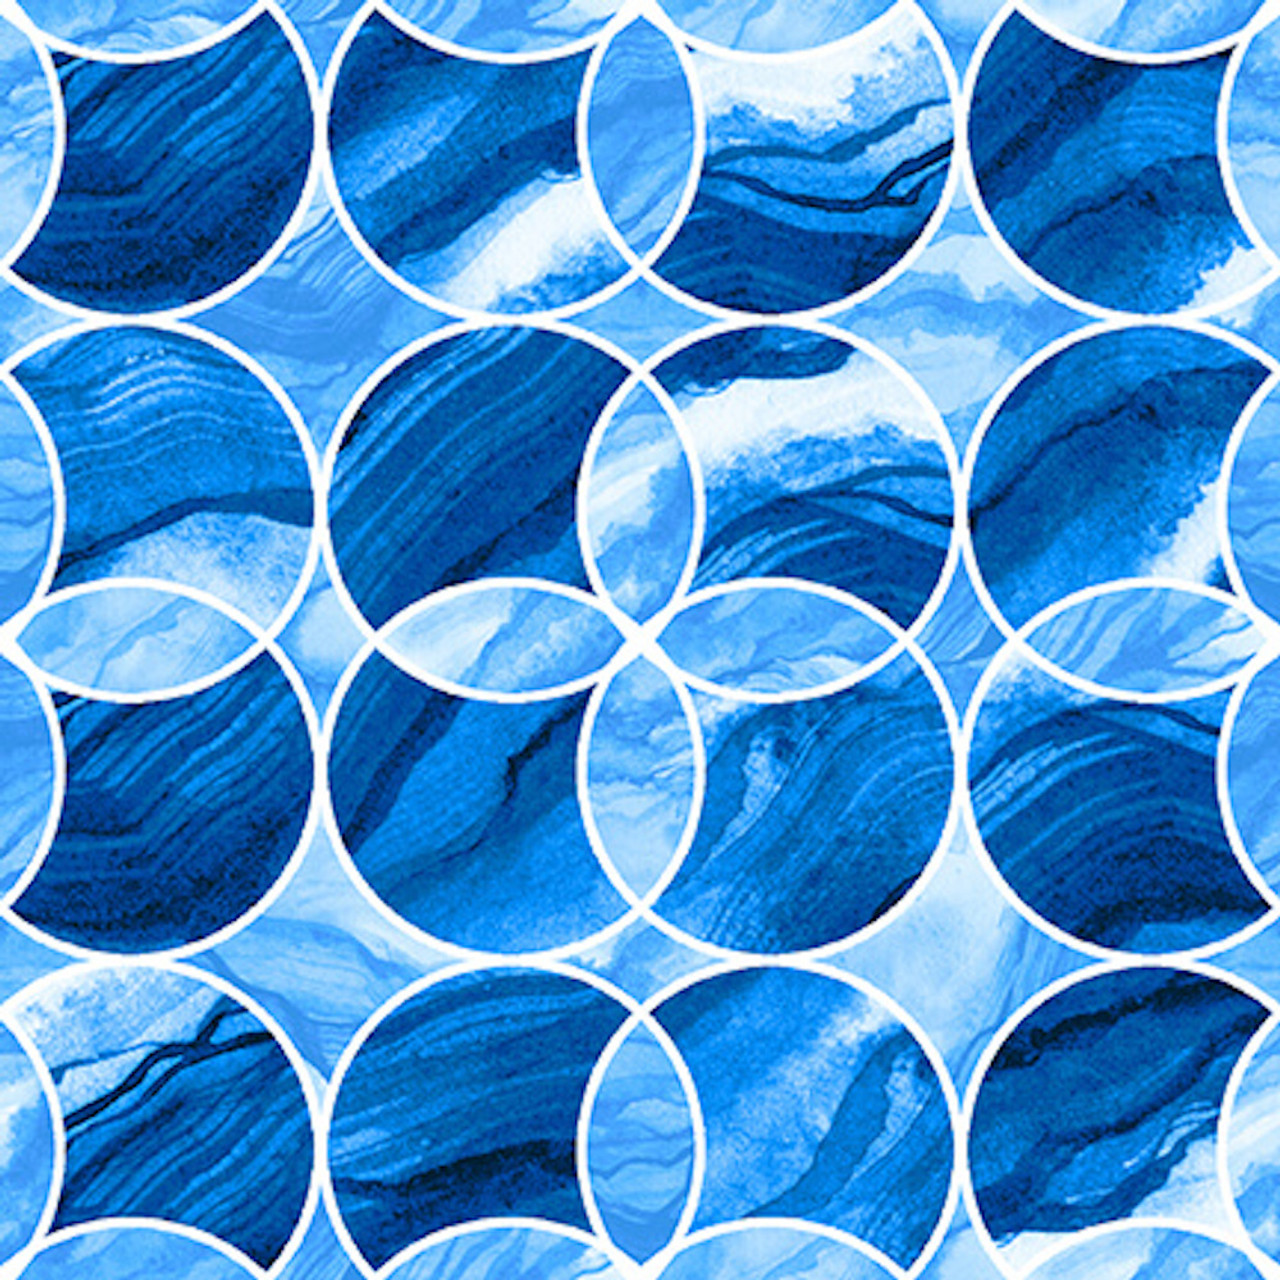 Blank Quilting 1056-77 Aziza Circles Blue Cotton Fabric by The Yard